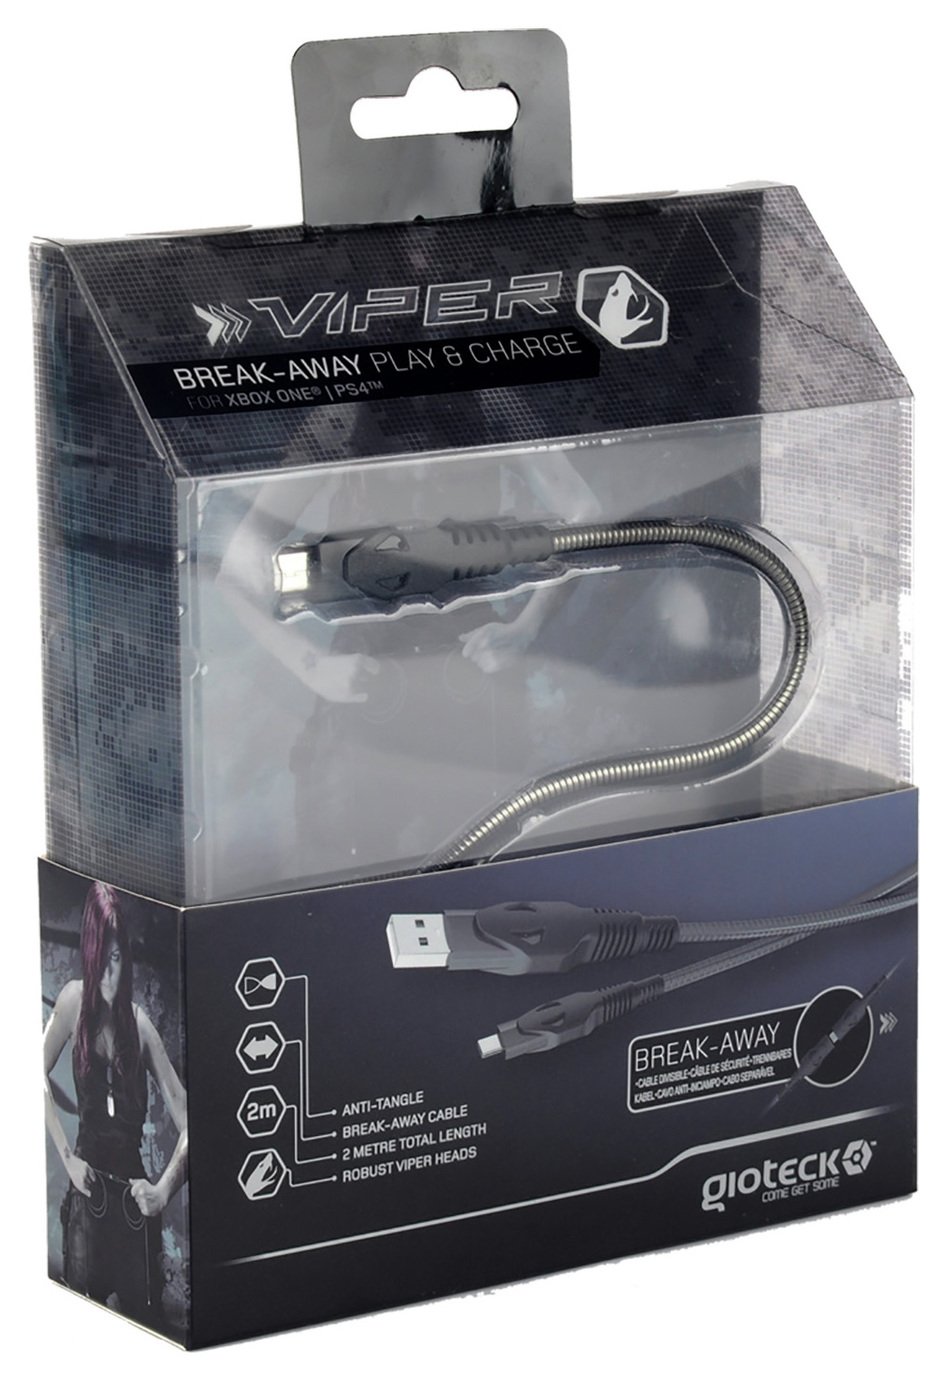 Gioteck TX Viper Play & Charge Breakaway Charge Cable